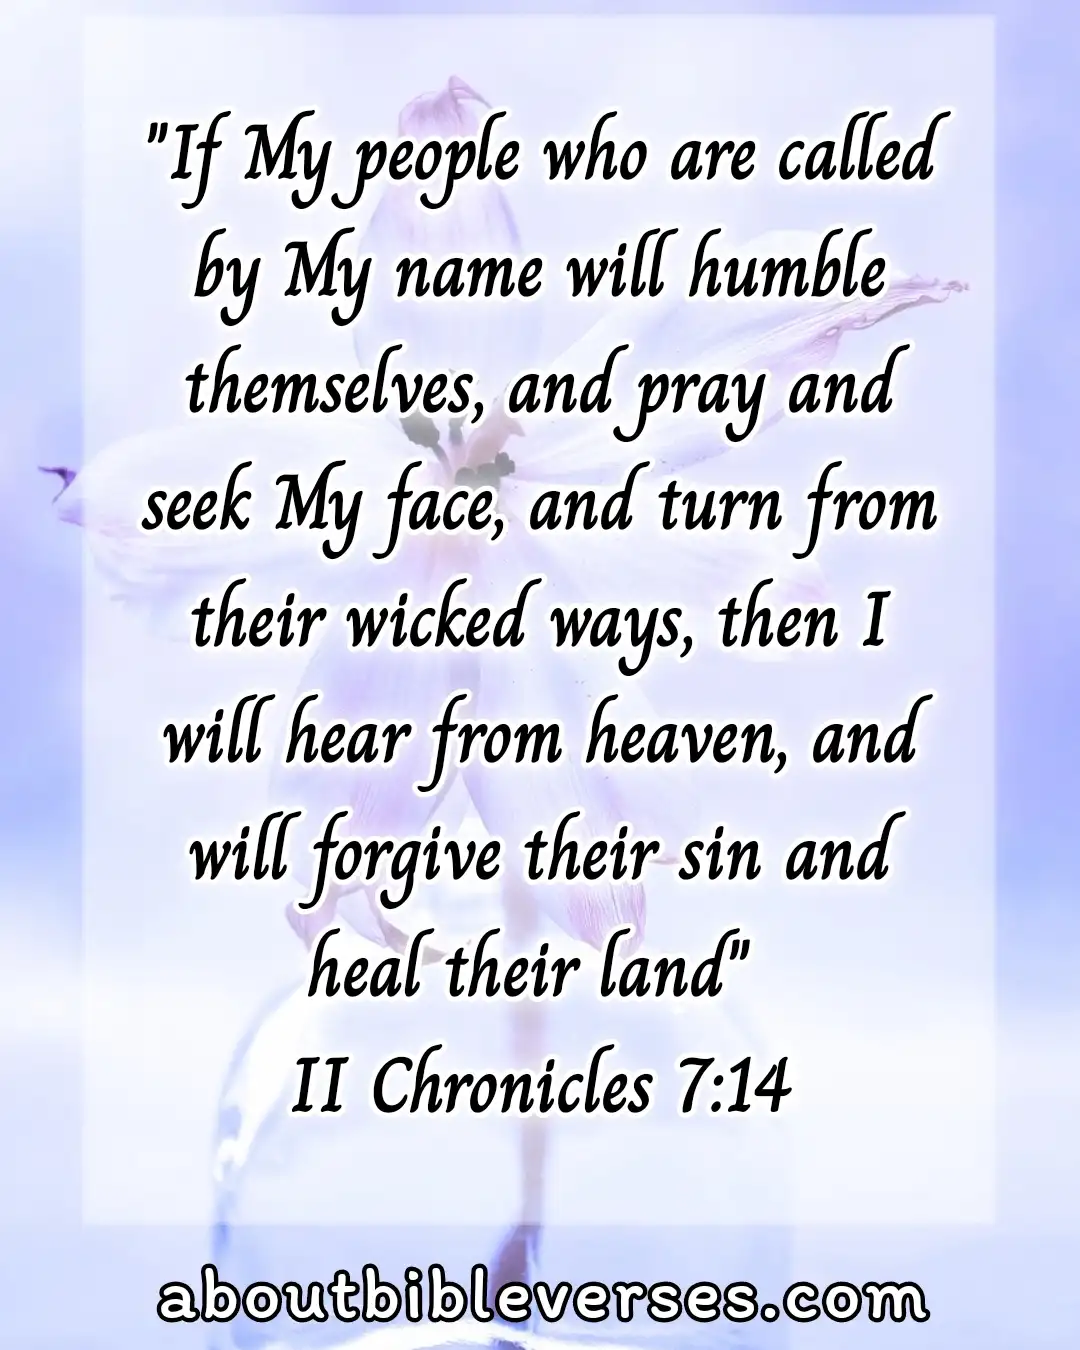 Bible Verses About Forgiveness of sins (2 Chronicles 7:14)